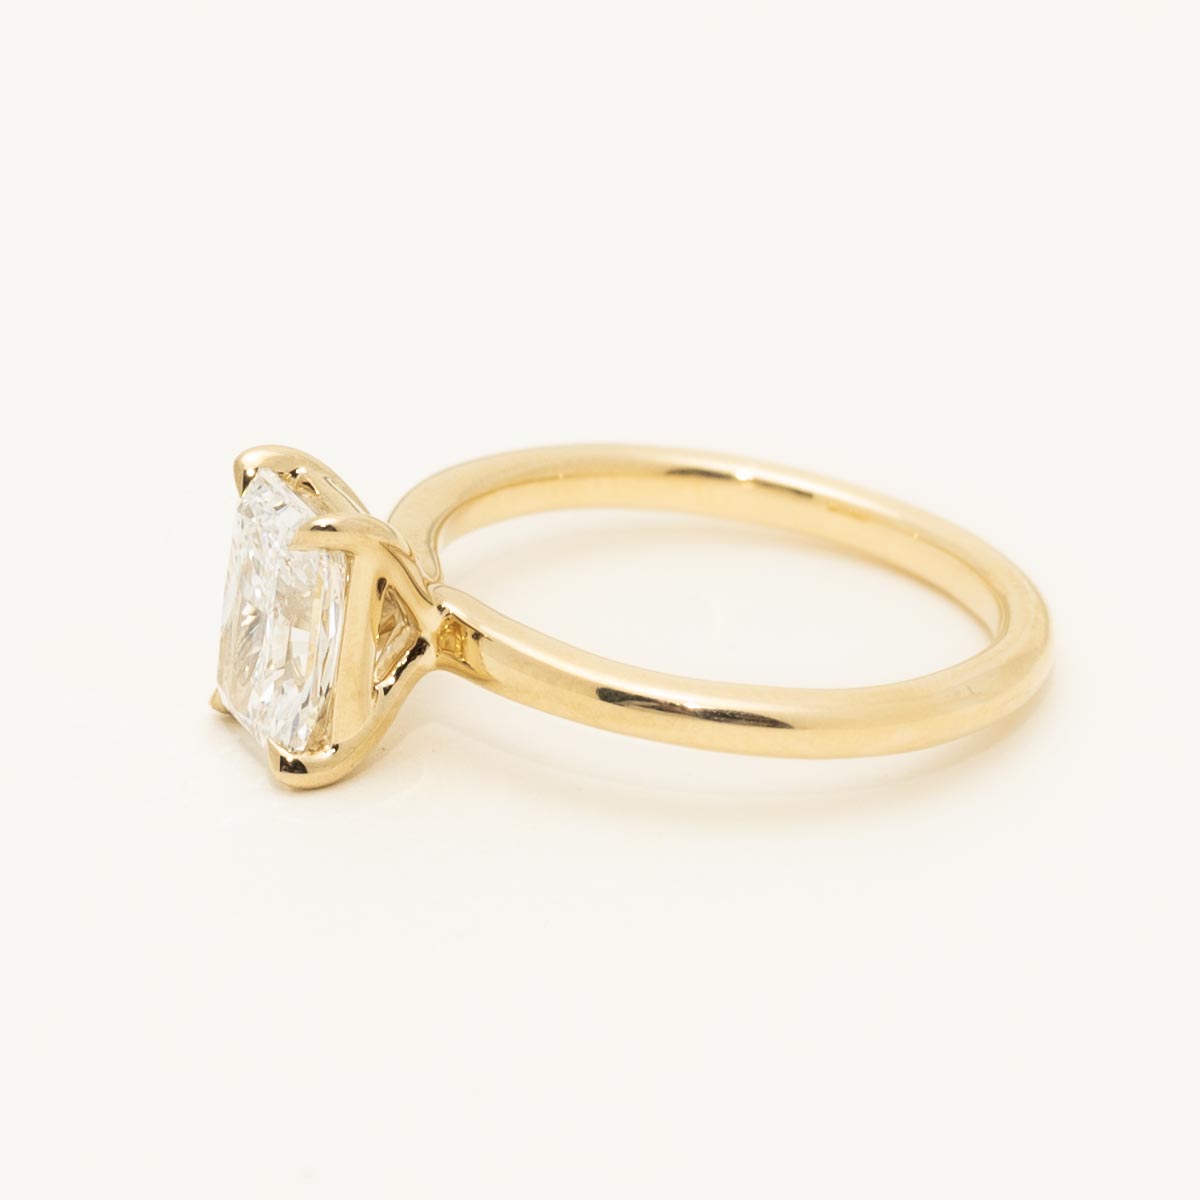 Lab Grown Radiant Cut Diamond Solitaire Ring in 14kt Yellow Gold (1 1/2ct)